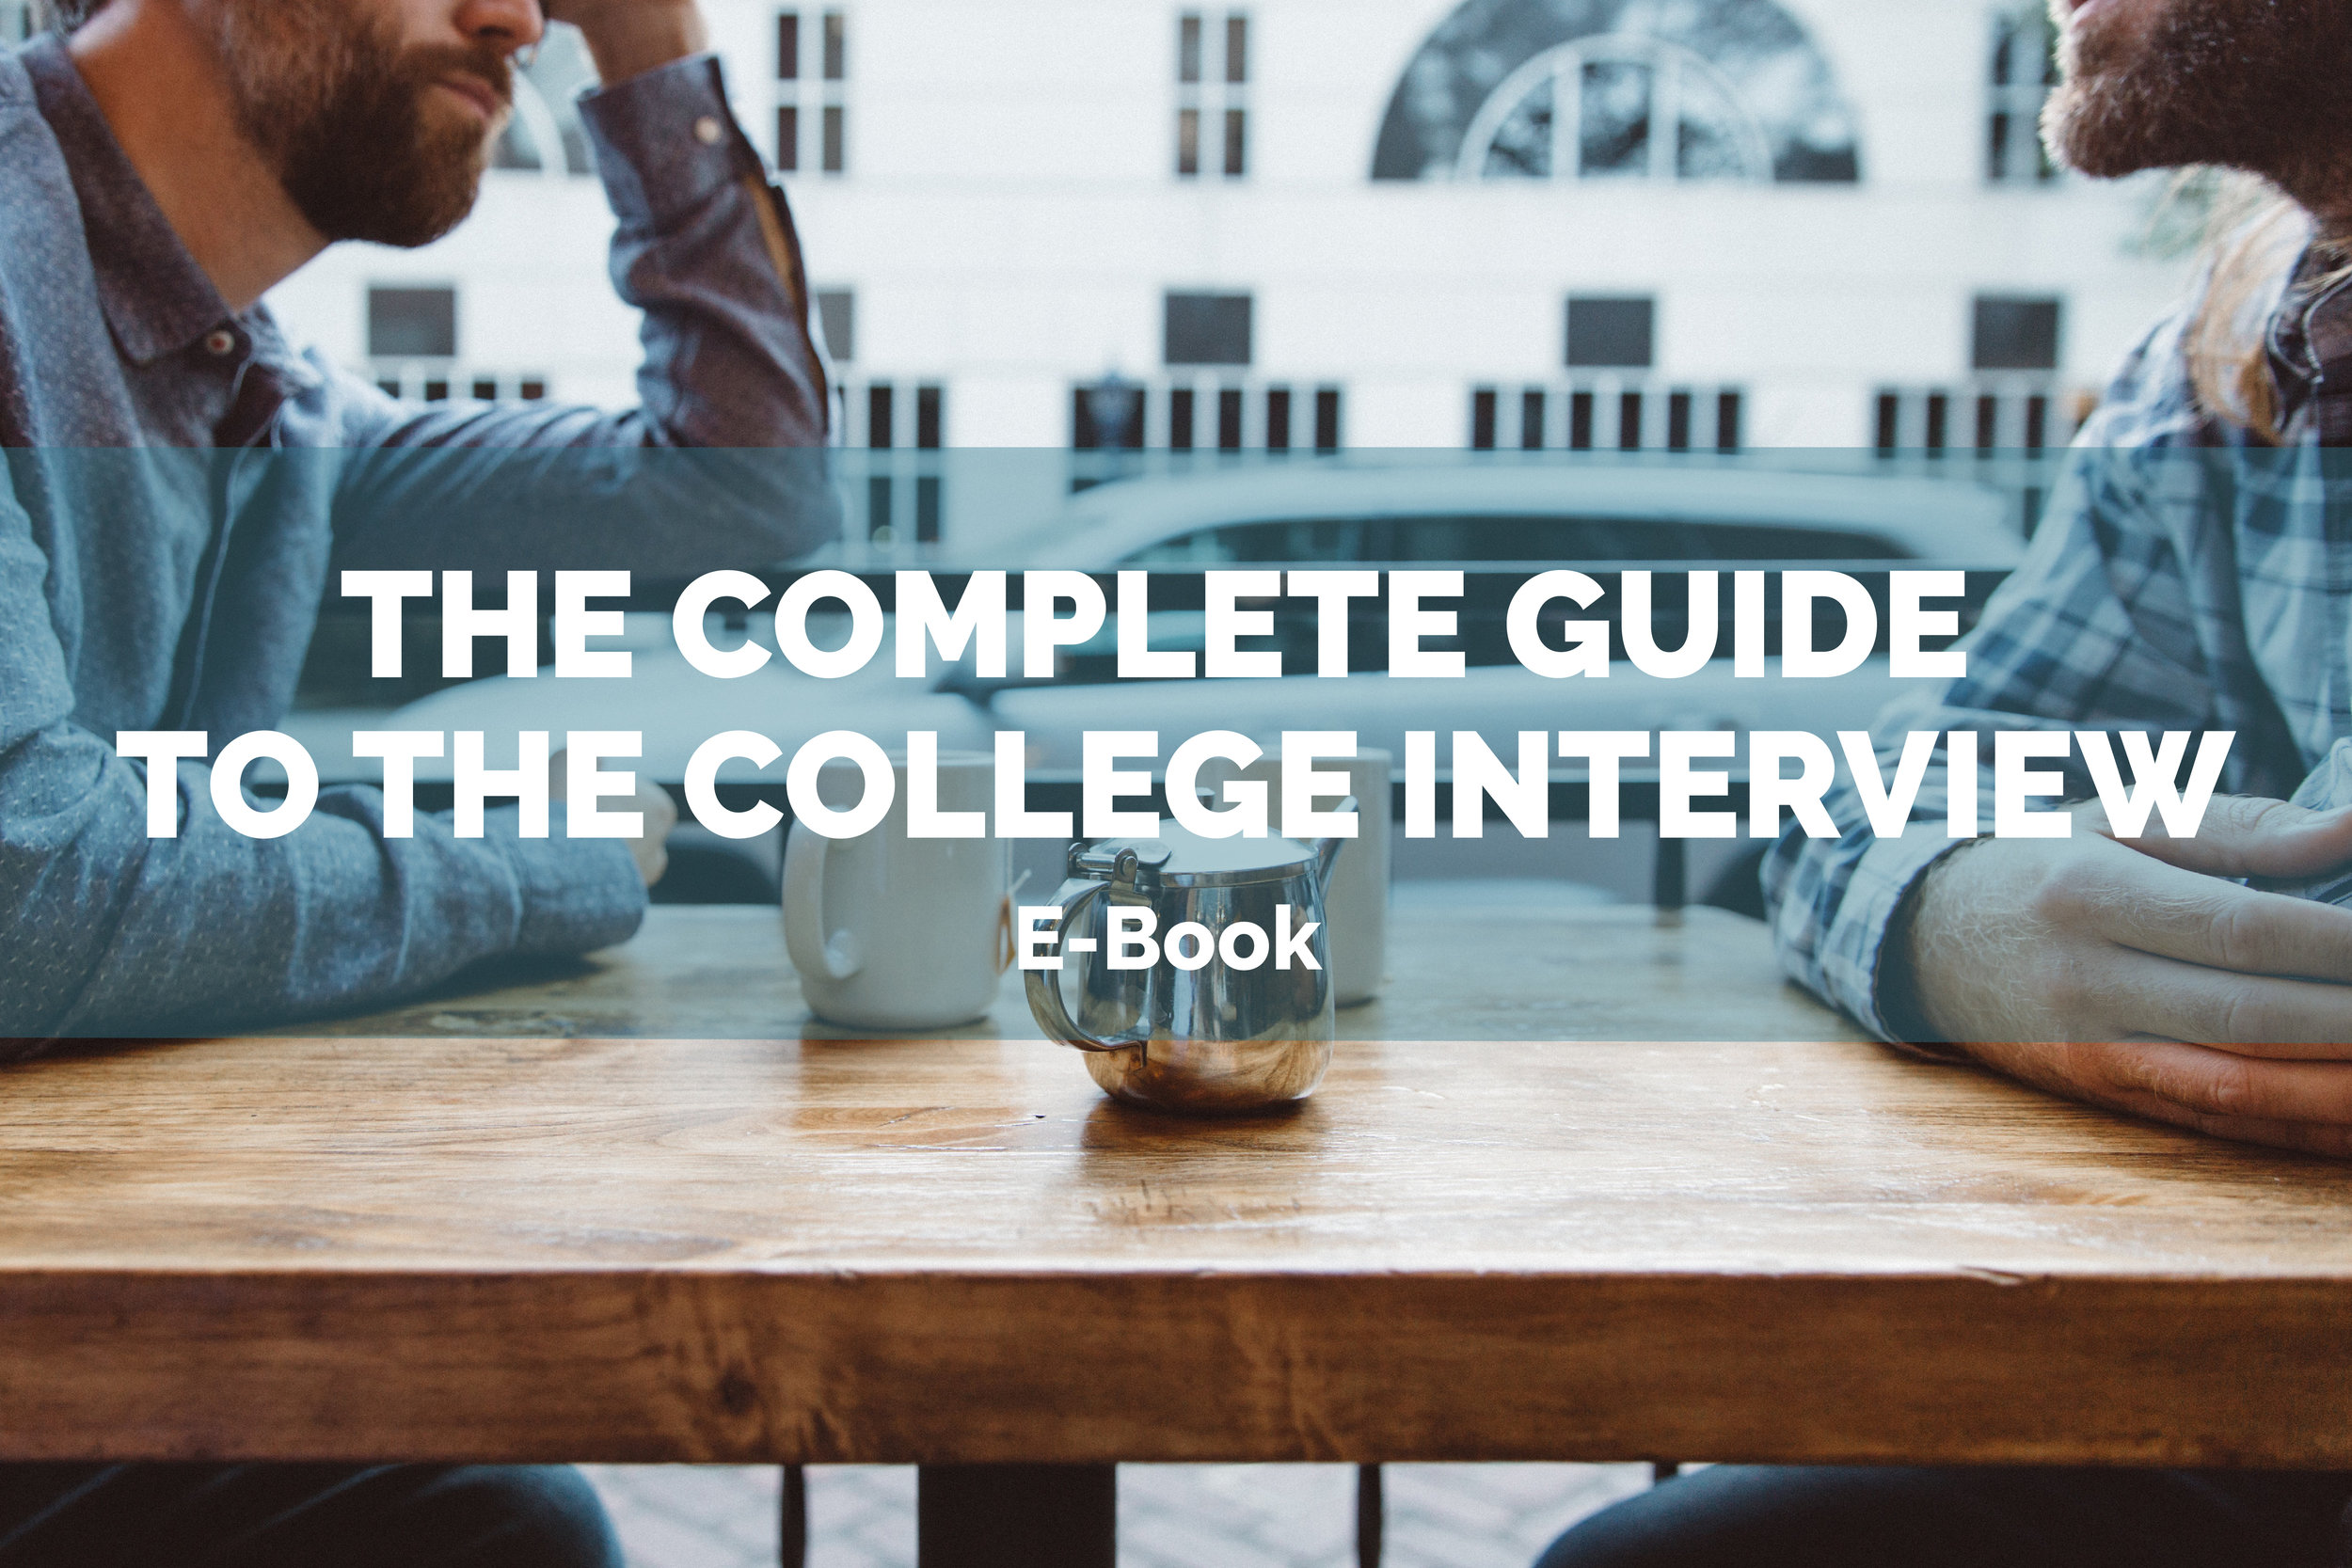 The Complete Guide to the College Interview